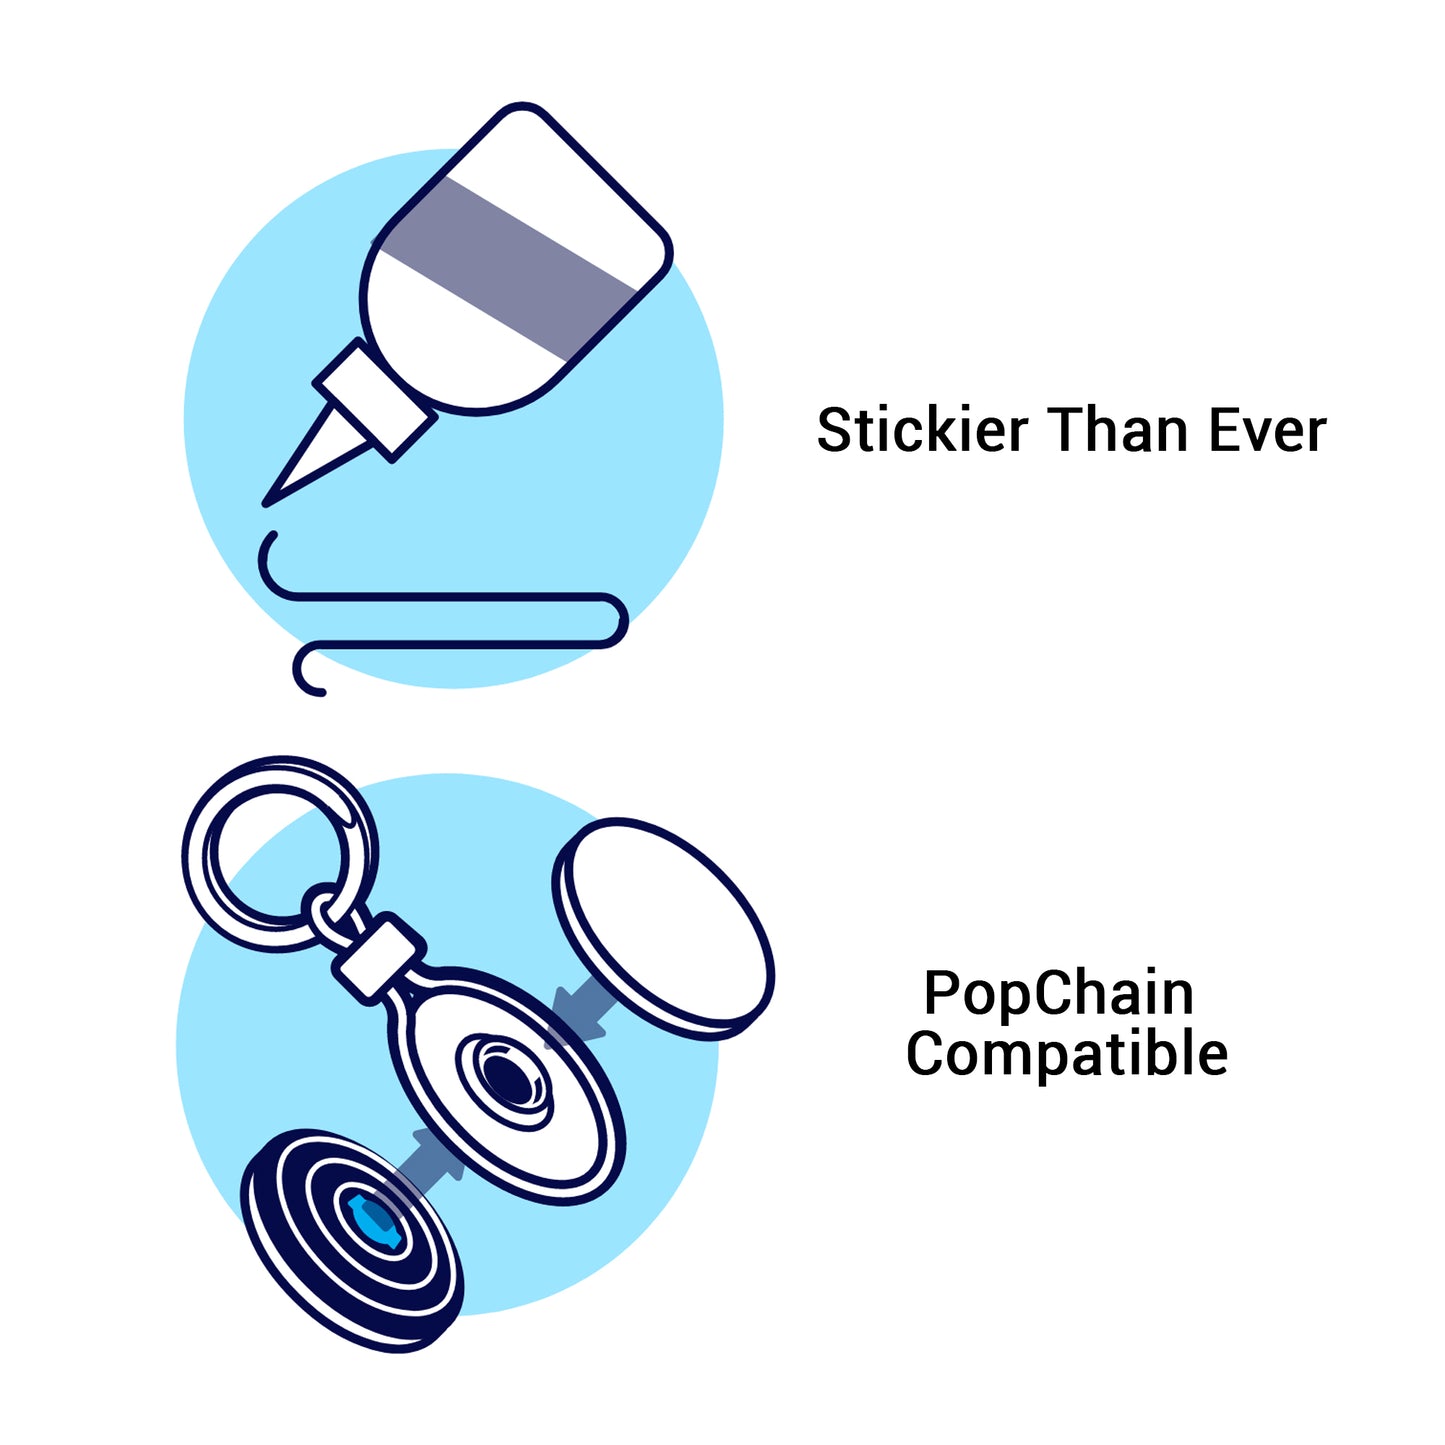 PopSockets PopGrip Swappable Premium - Tidepool Checker White (Barcode: 840173706992 )